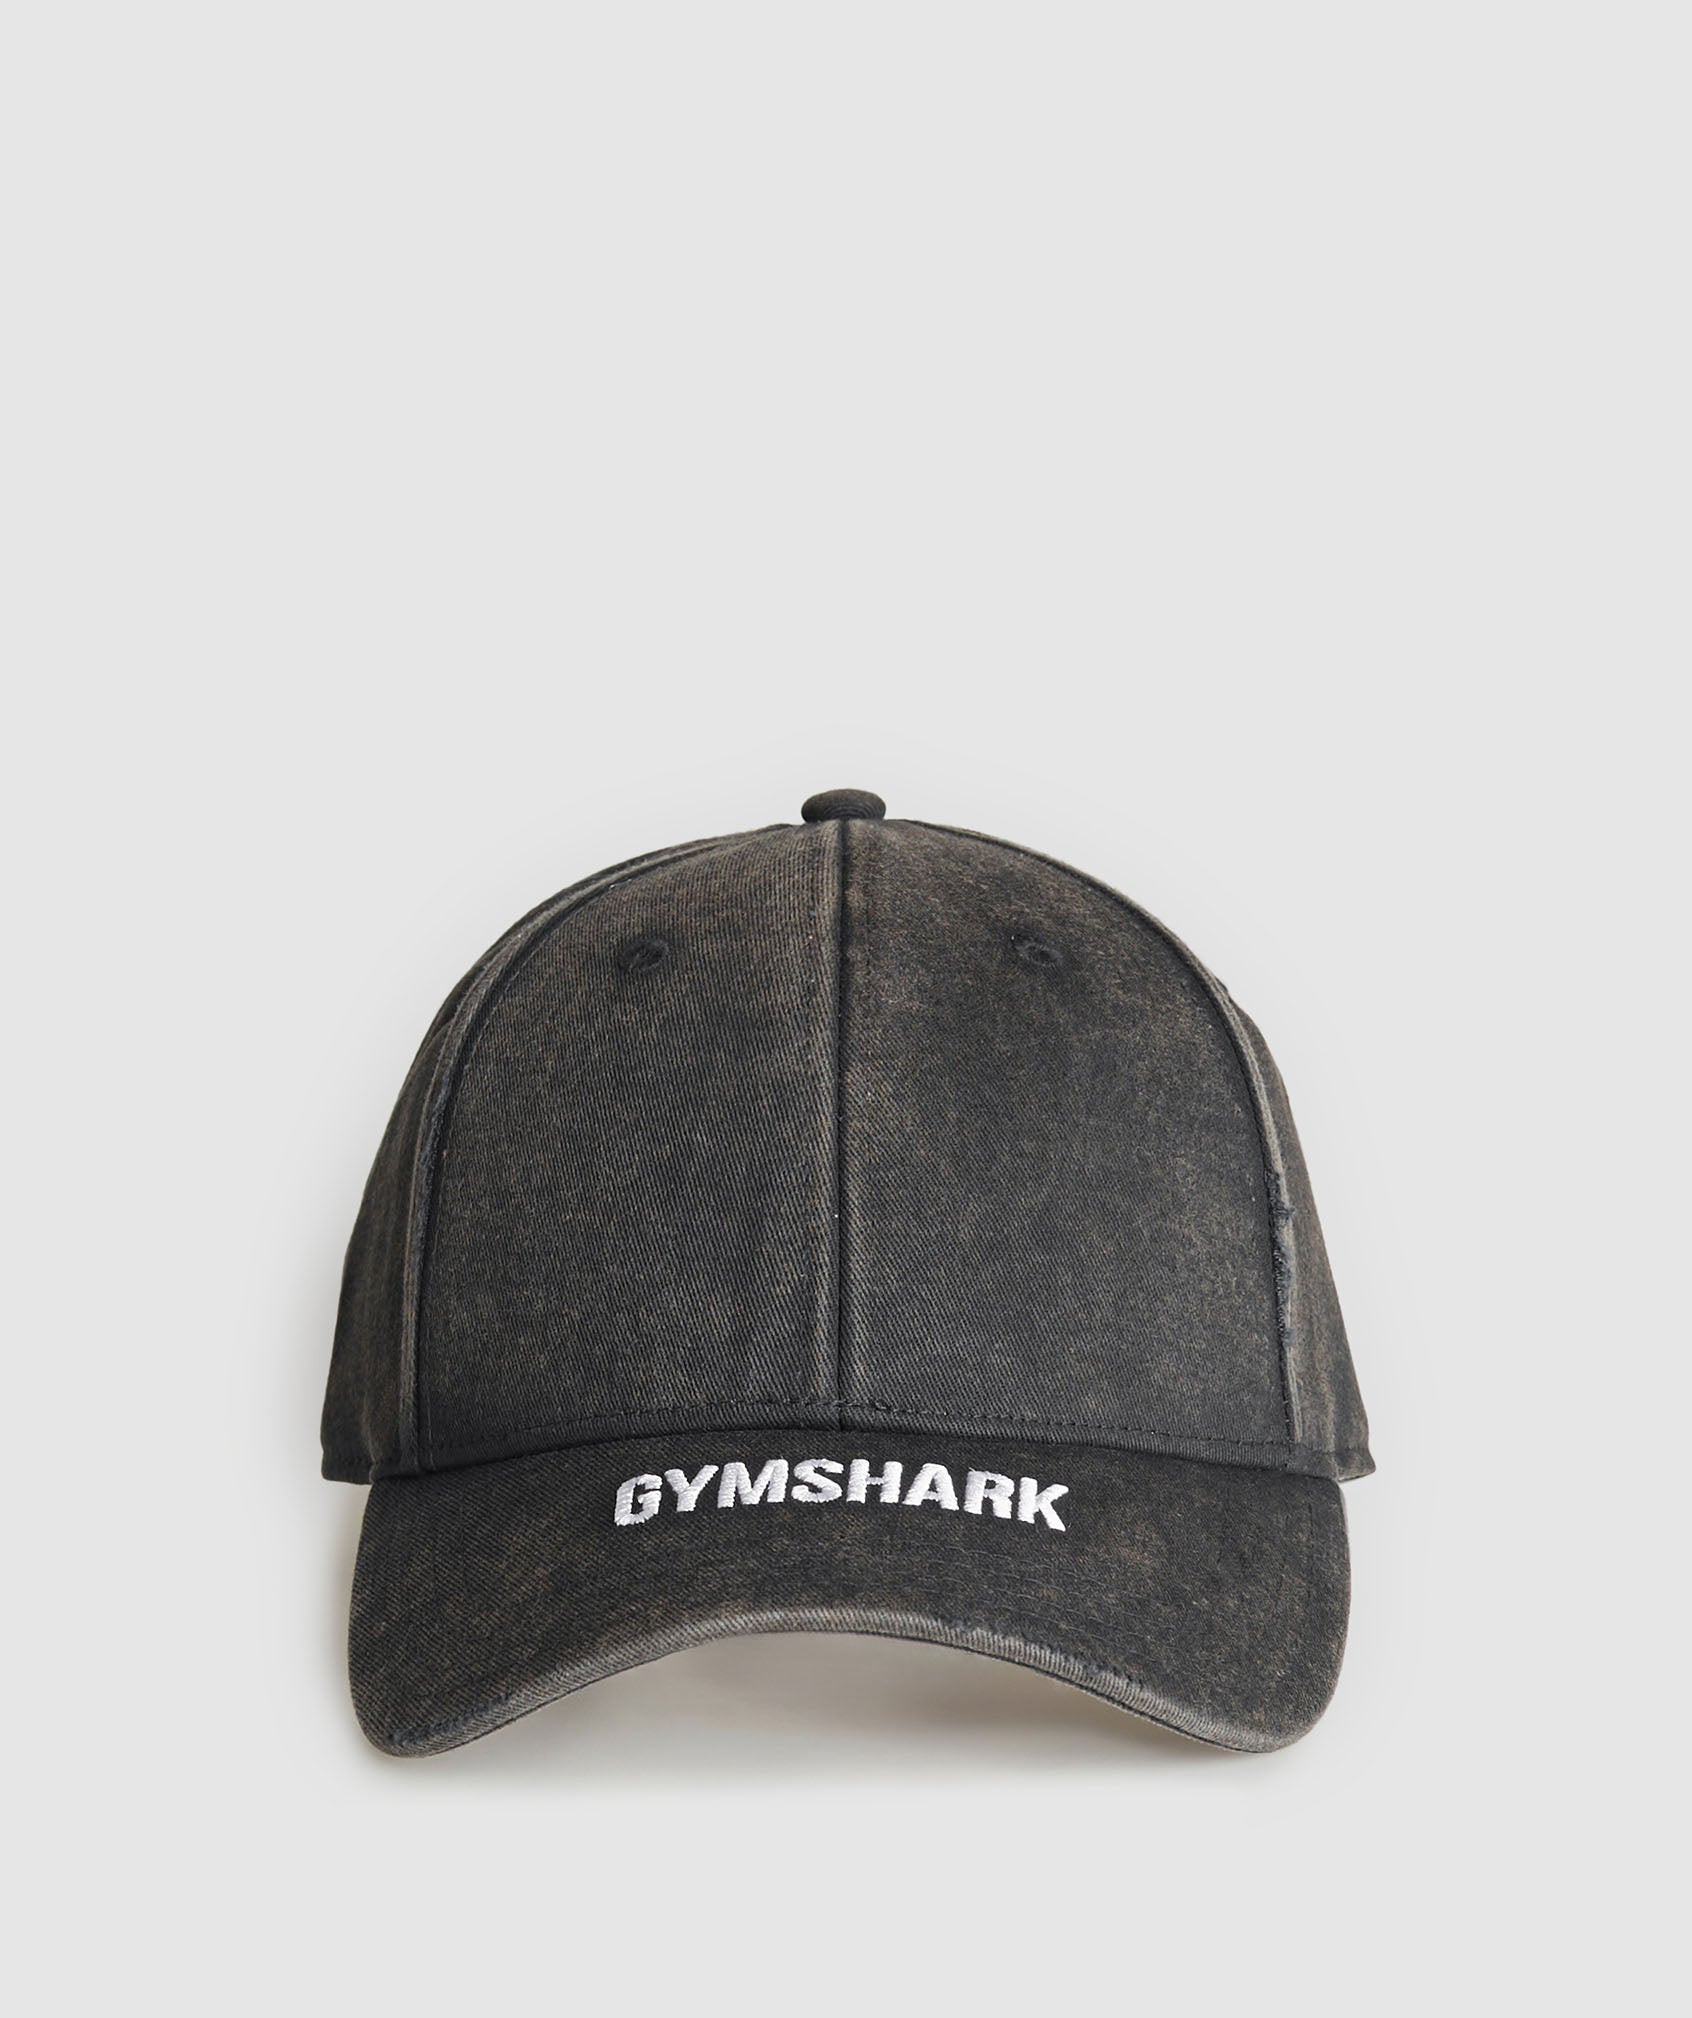 Washed Cap in Black - view 1